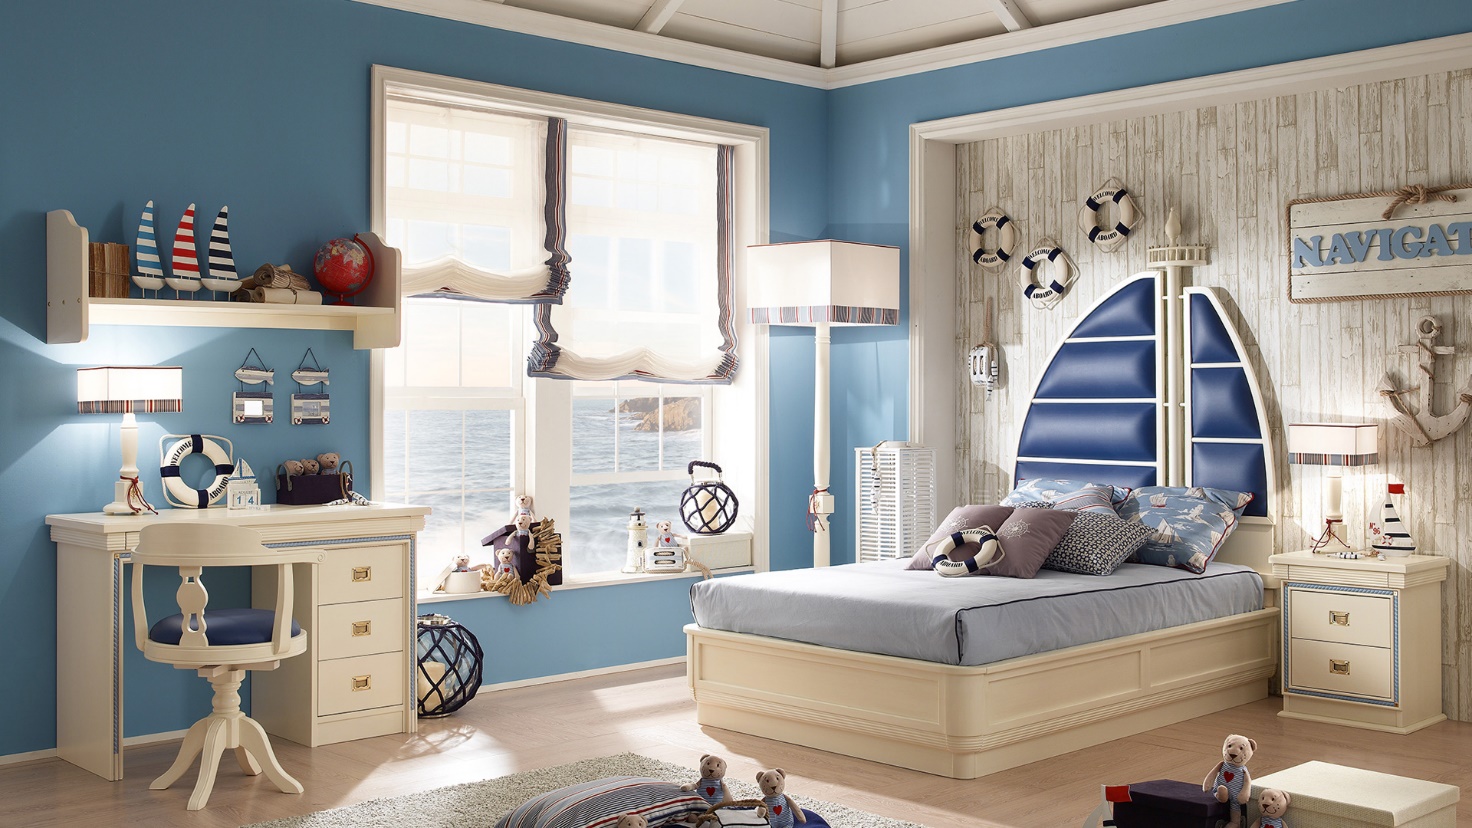 Importance of a Well-Designed Children's Bedroom